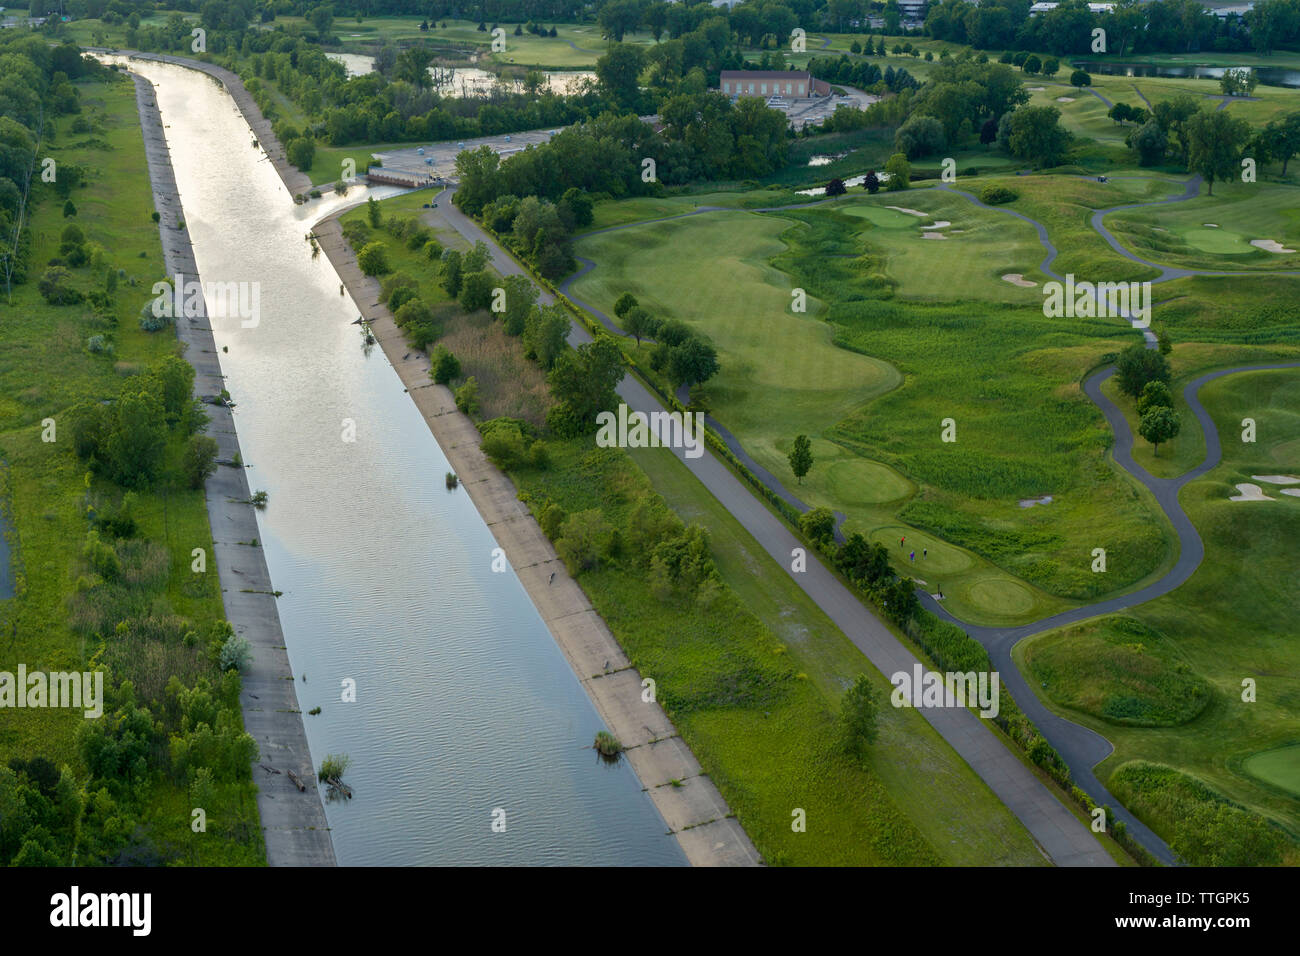 Rouge River and golf course, Dearborn Michigan Stock Photo